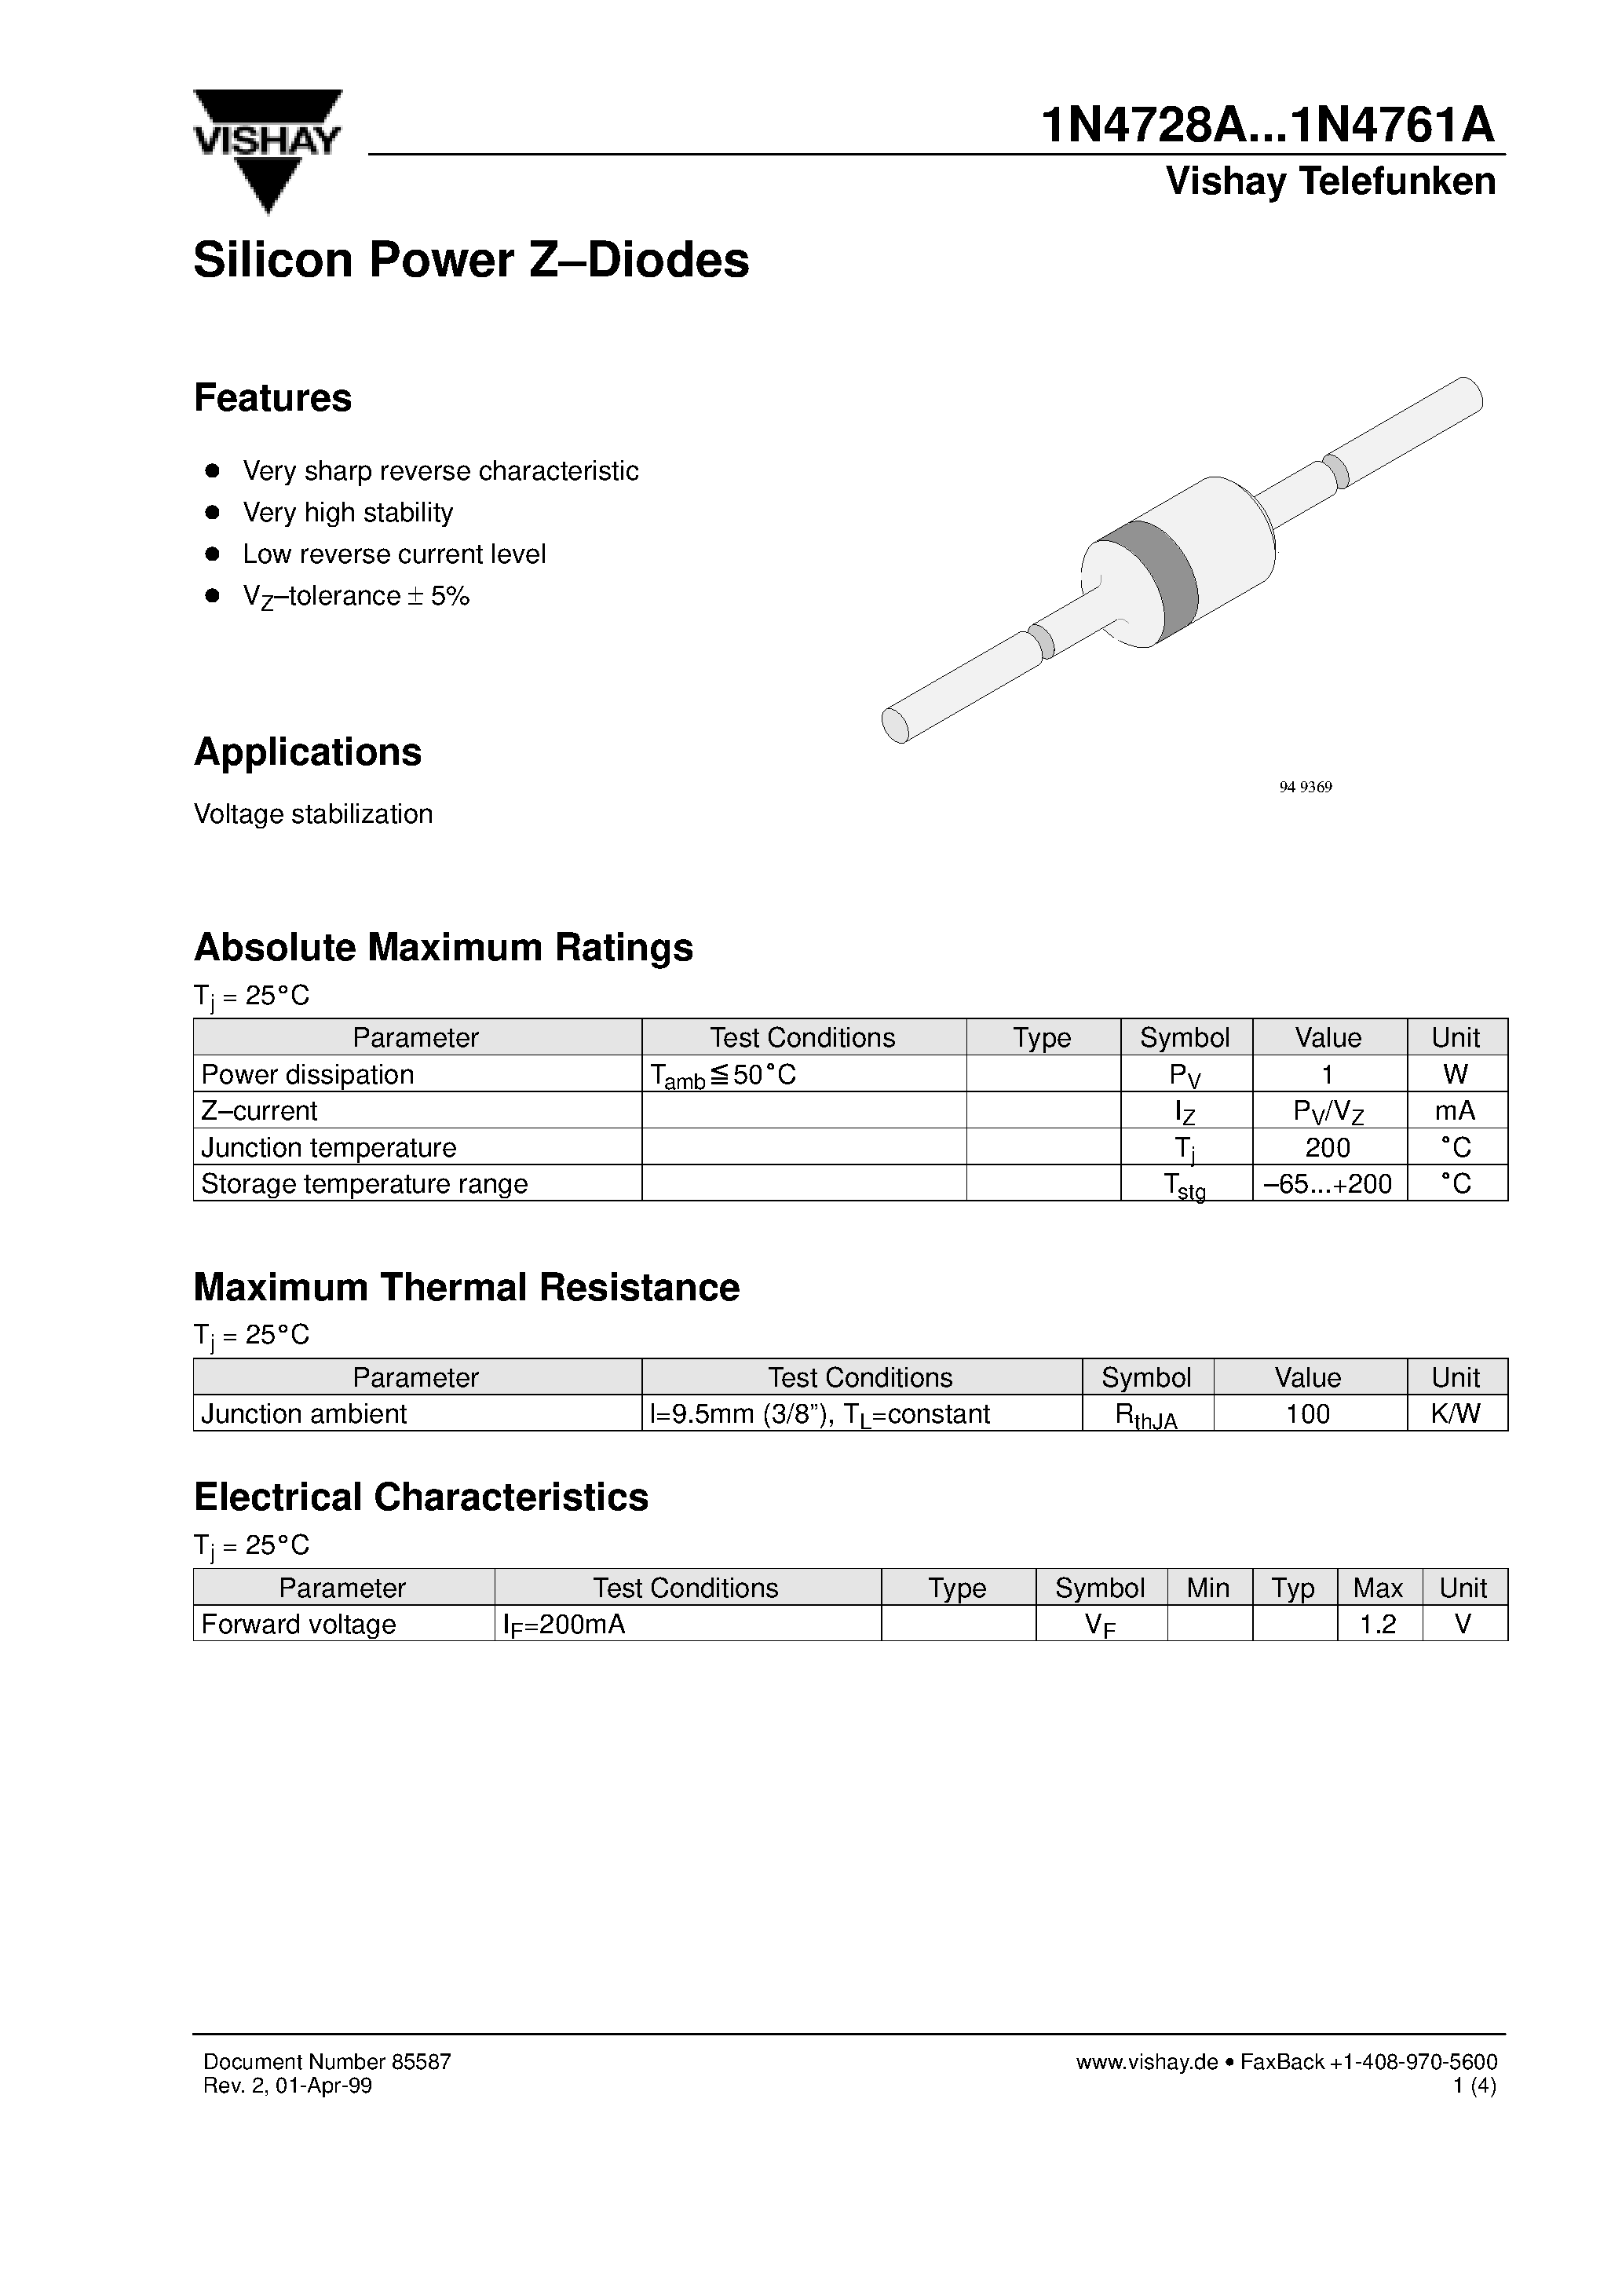 Datasheet 1N4742A - Silicon Power Z-Diodes page 1